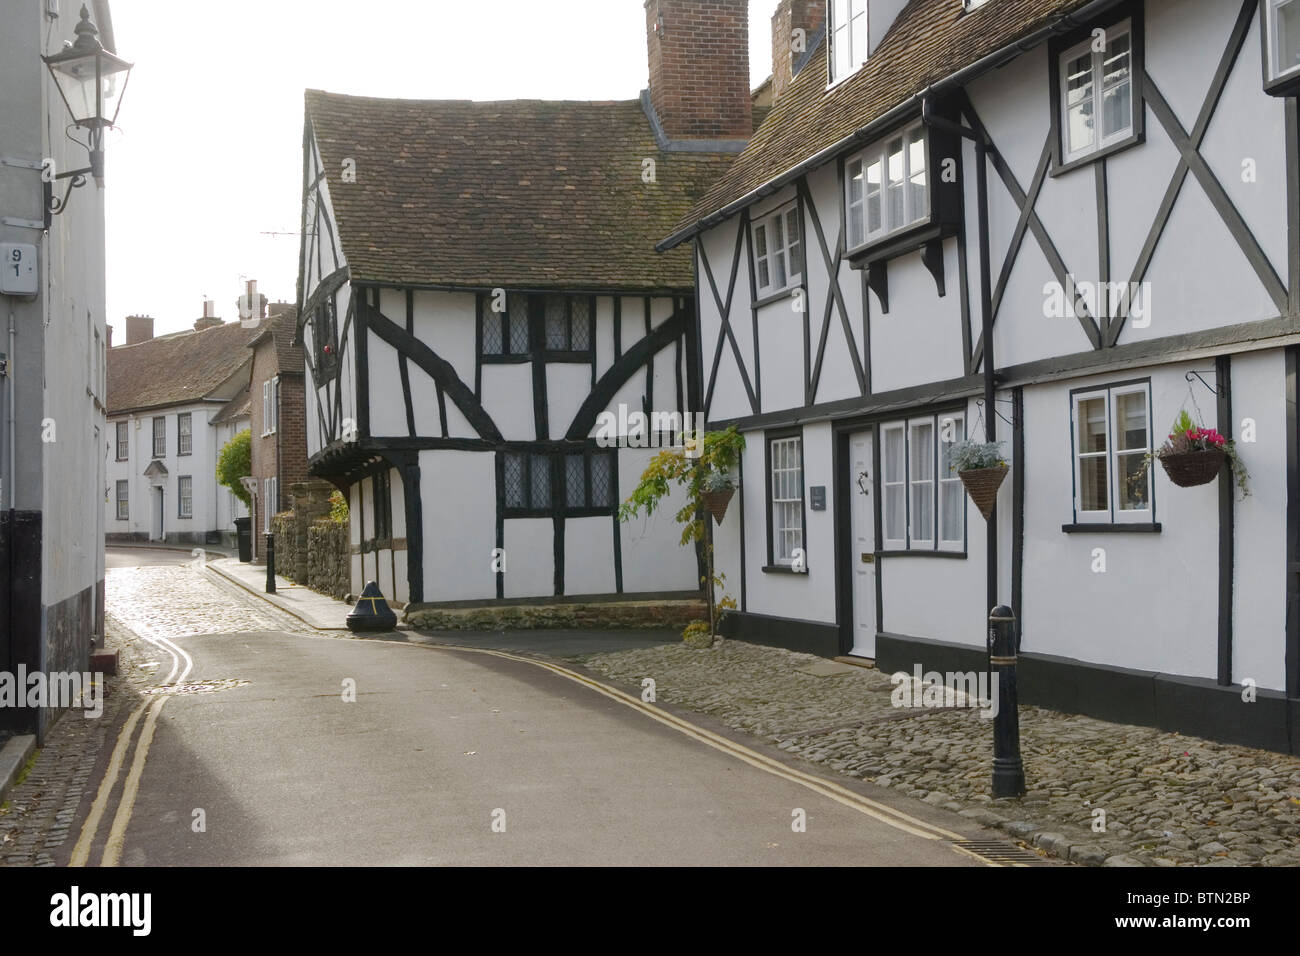 West Malling Kent Uk. King Street. Old traditional north Kent half timbered black and white buildings HOMER SYKES Stock Photo